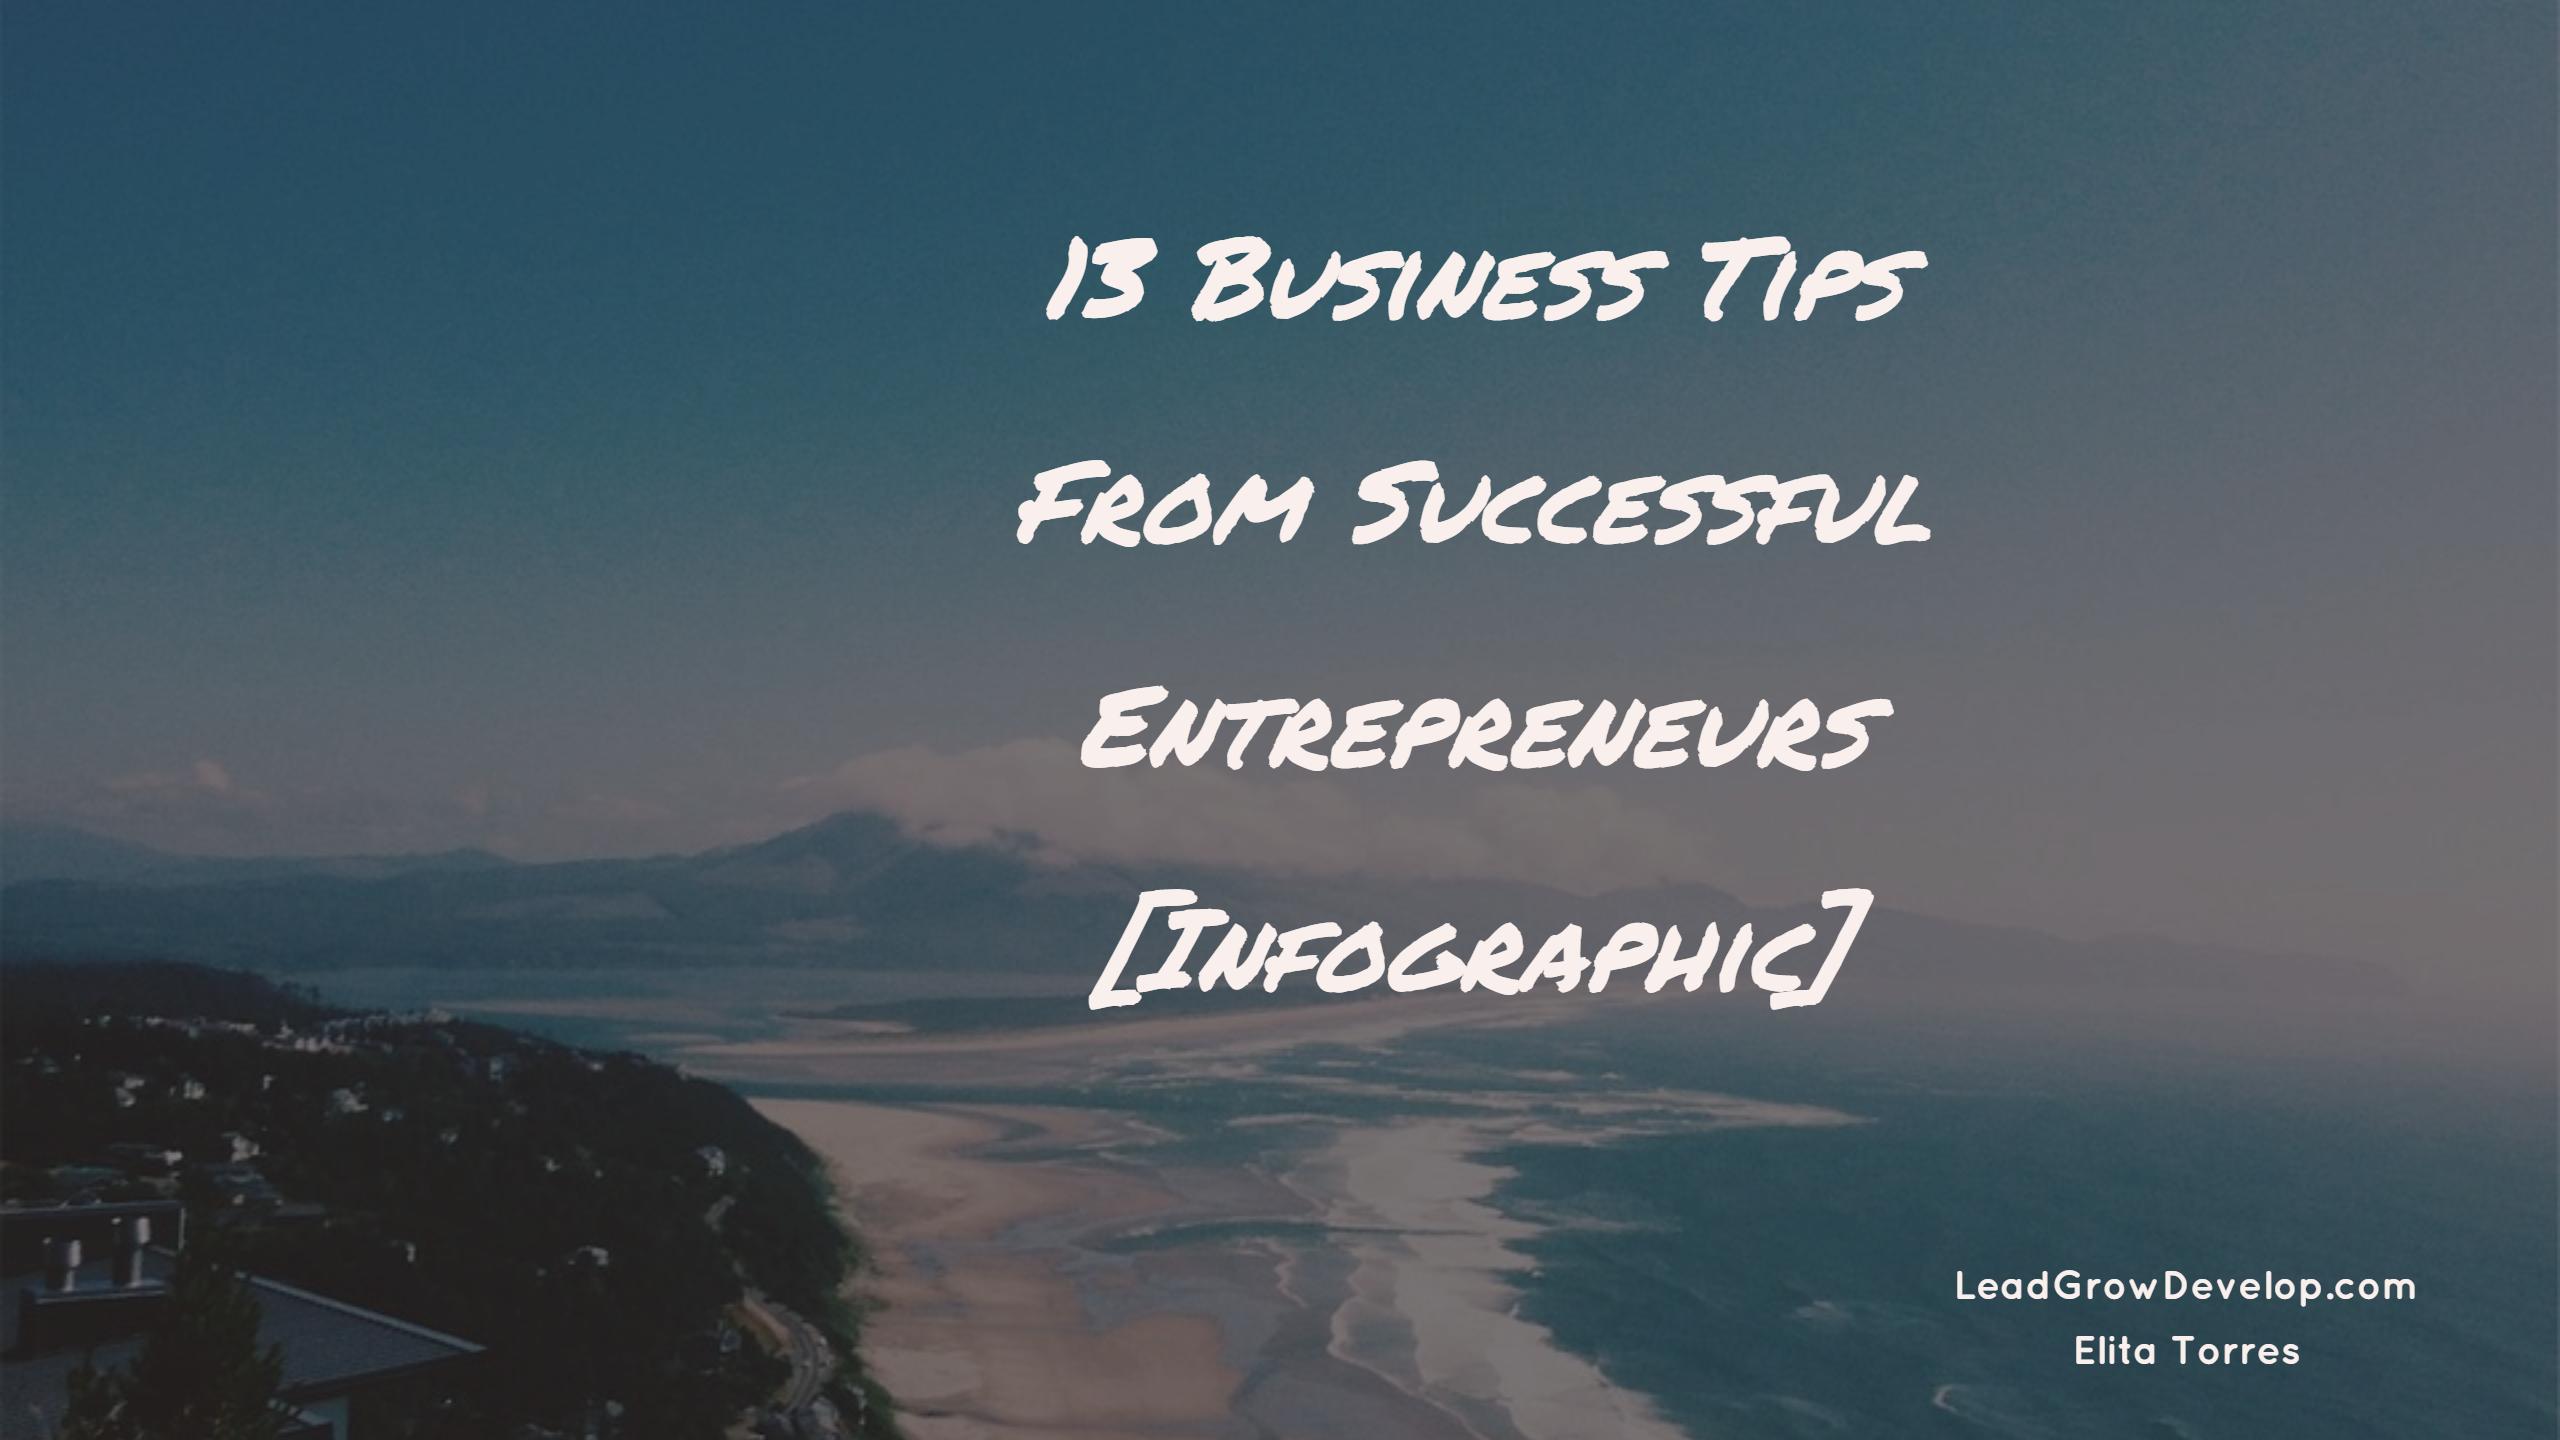 13-business-tips-from-successful-entrepreneurs-infographic